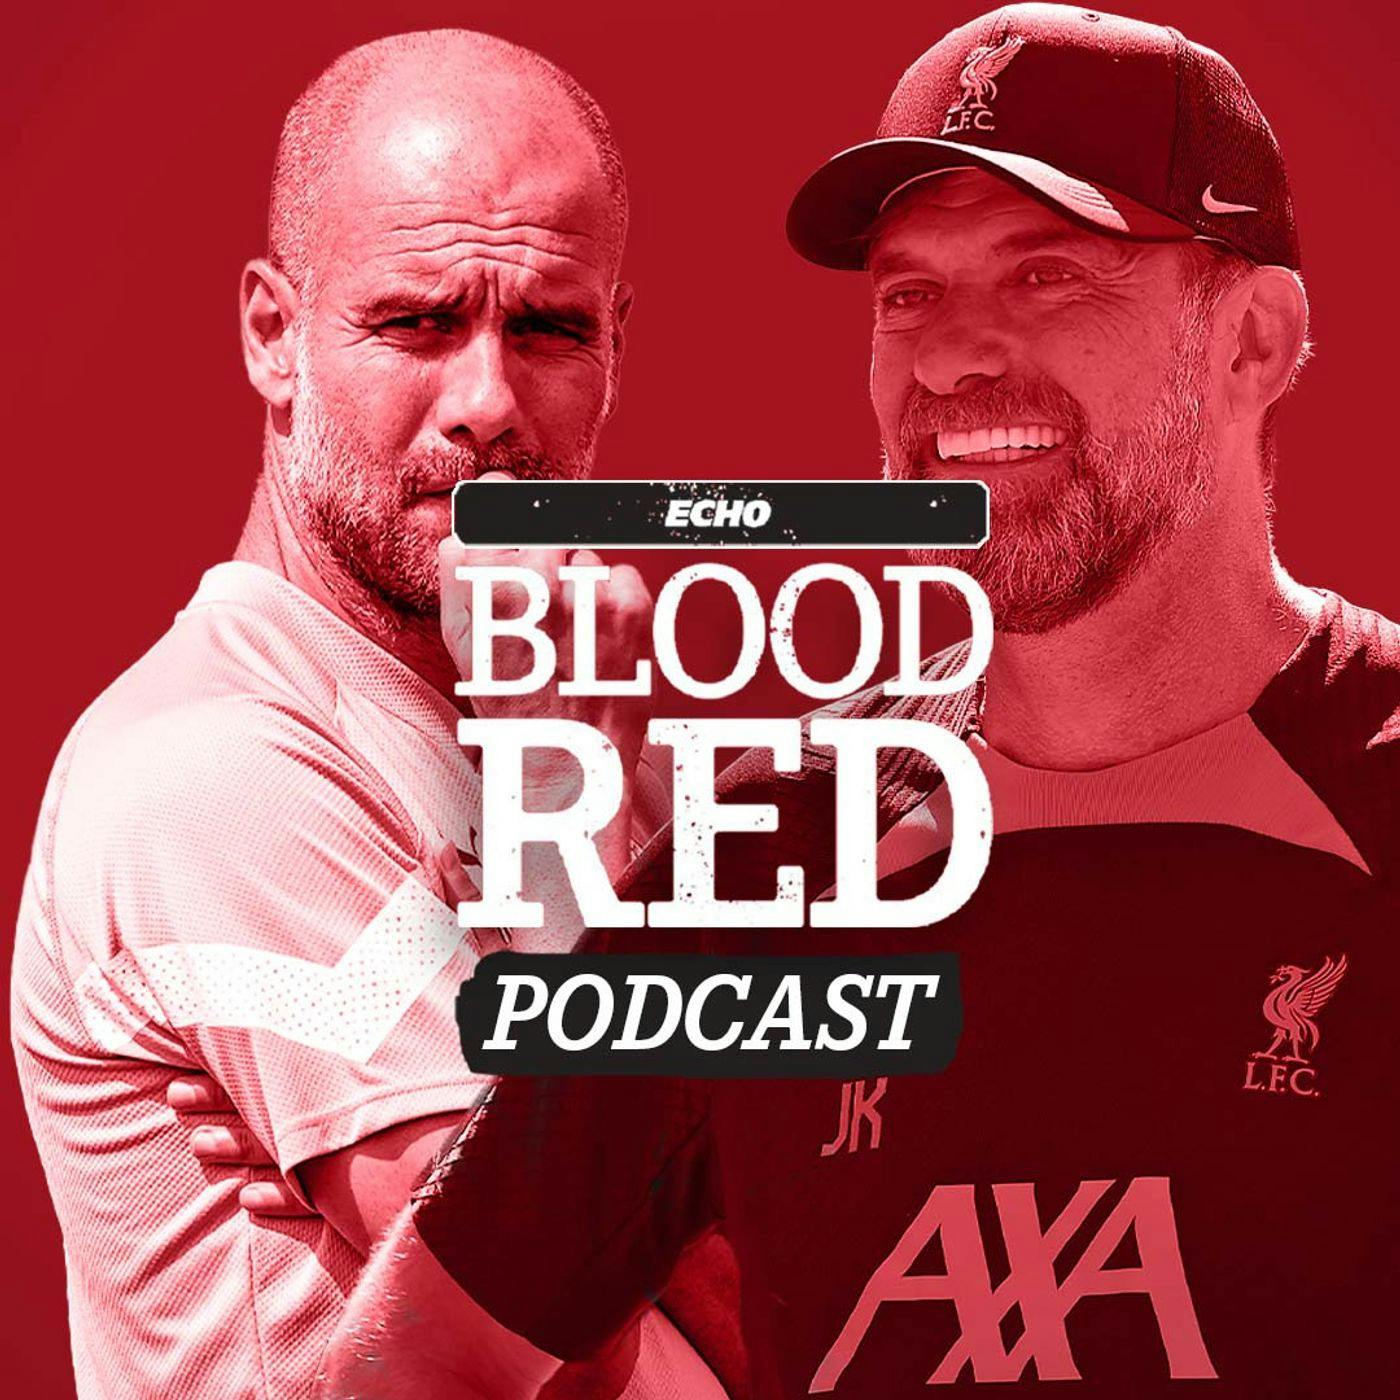 Blood Red: “INTERESTING TIMES AHEAD” Liverpool Prepare For Man City Community Shield Test